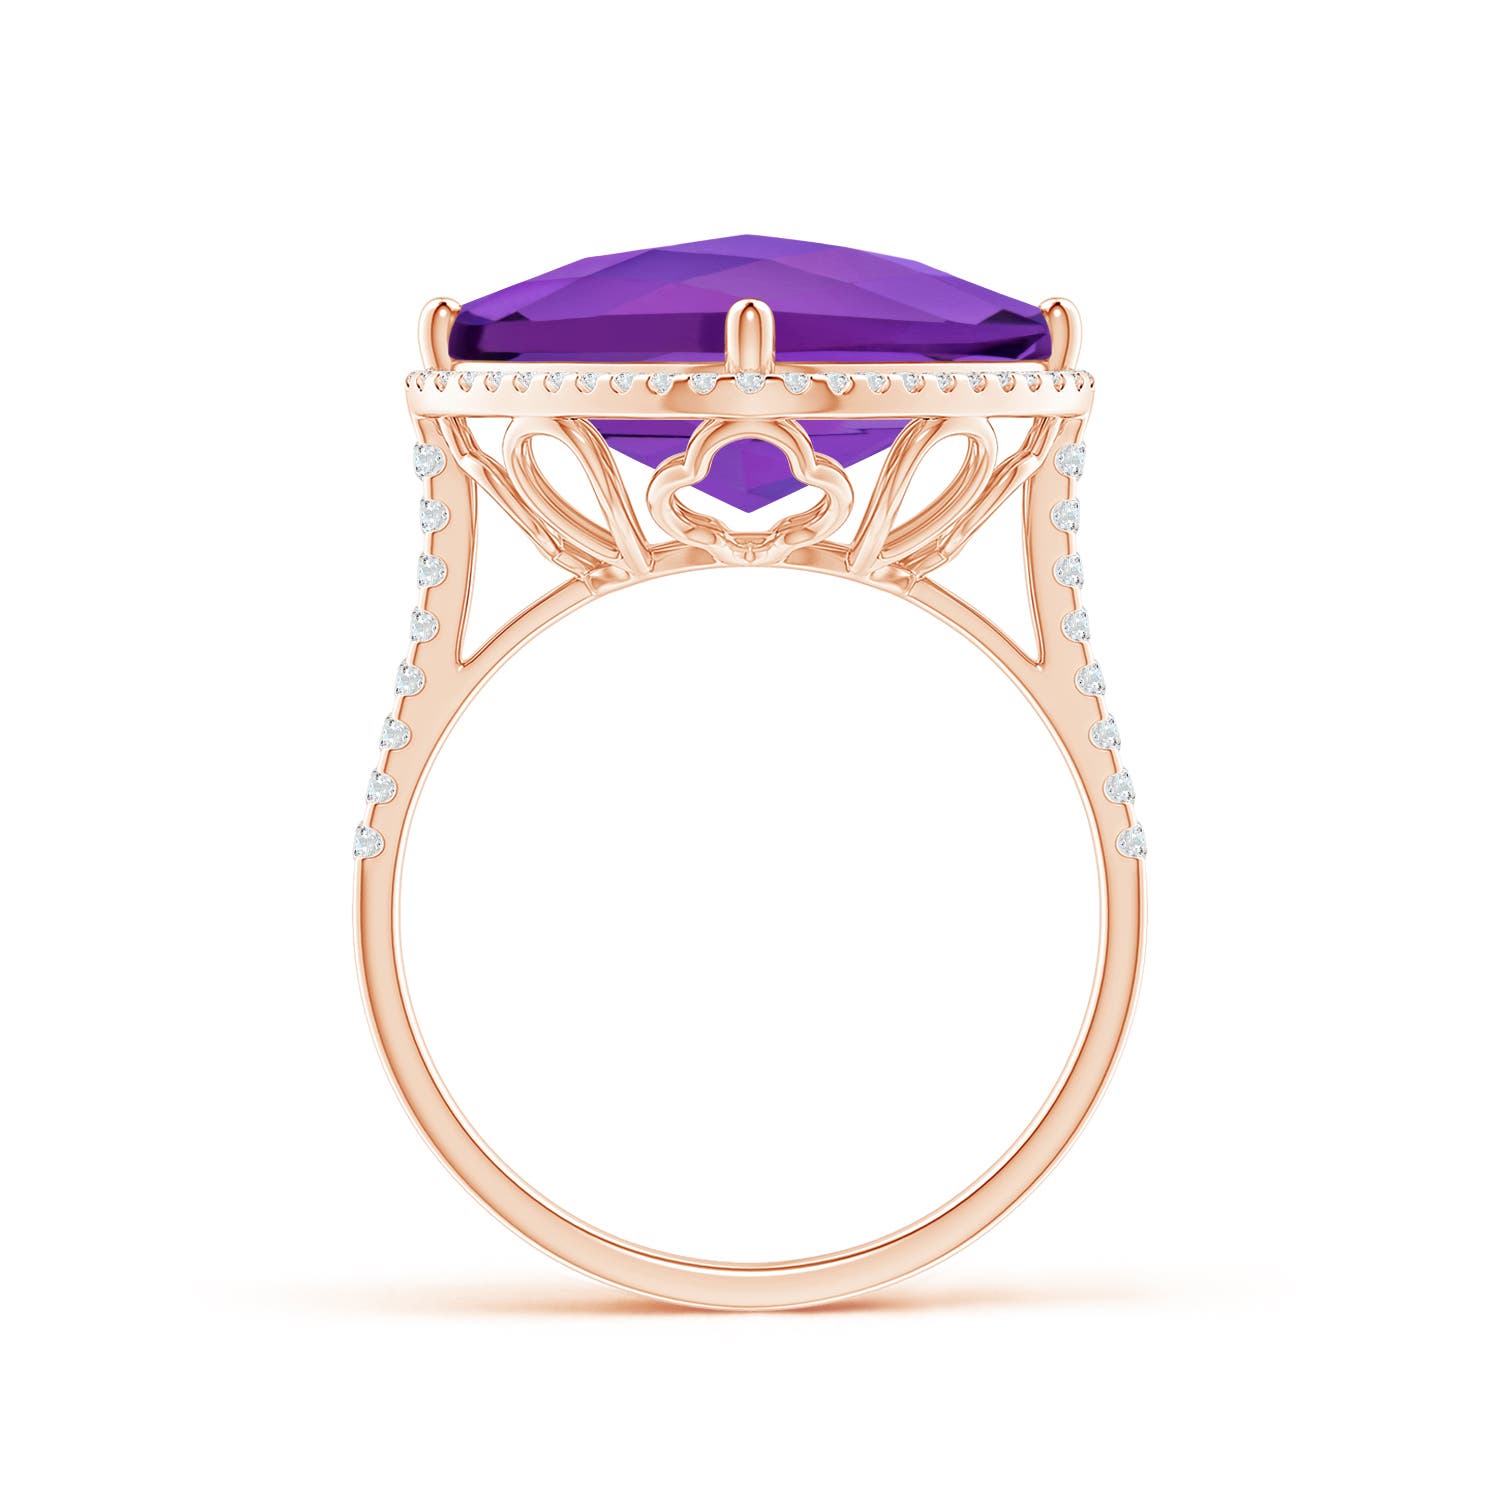 AAA - Amethyst / 8.32 CT / 14 KT Rose Gold